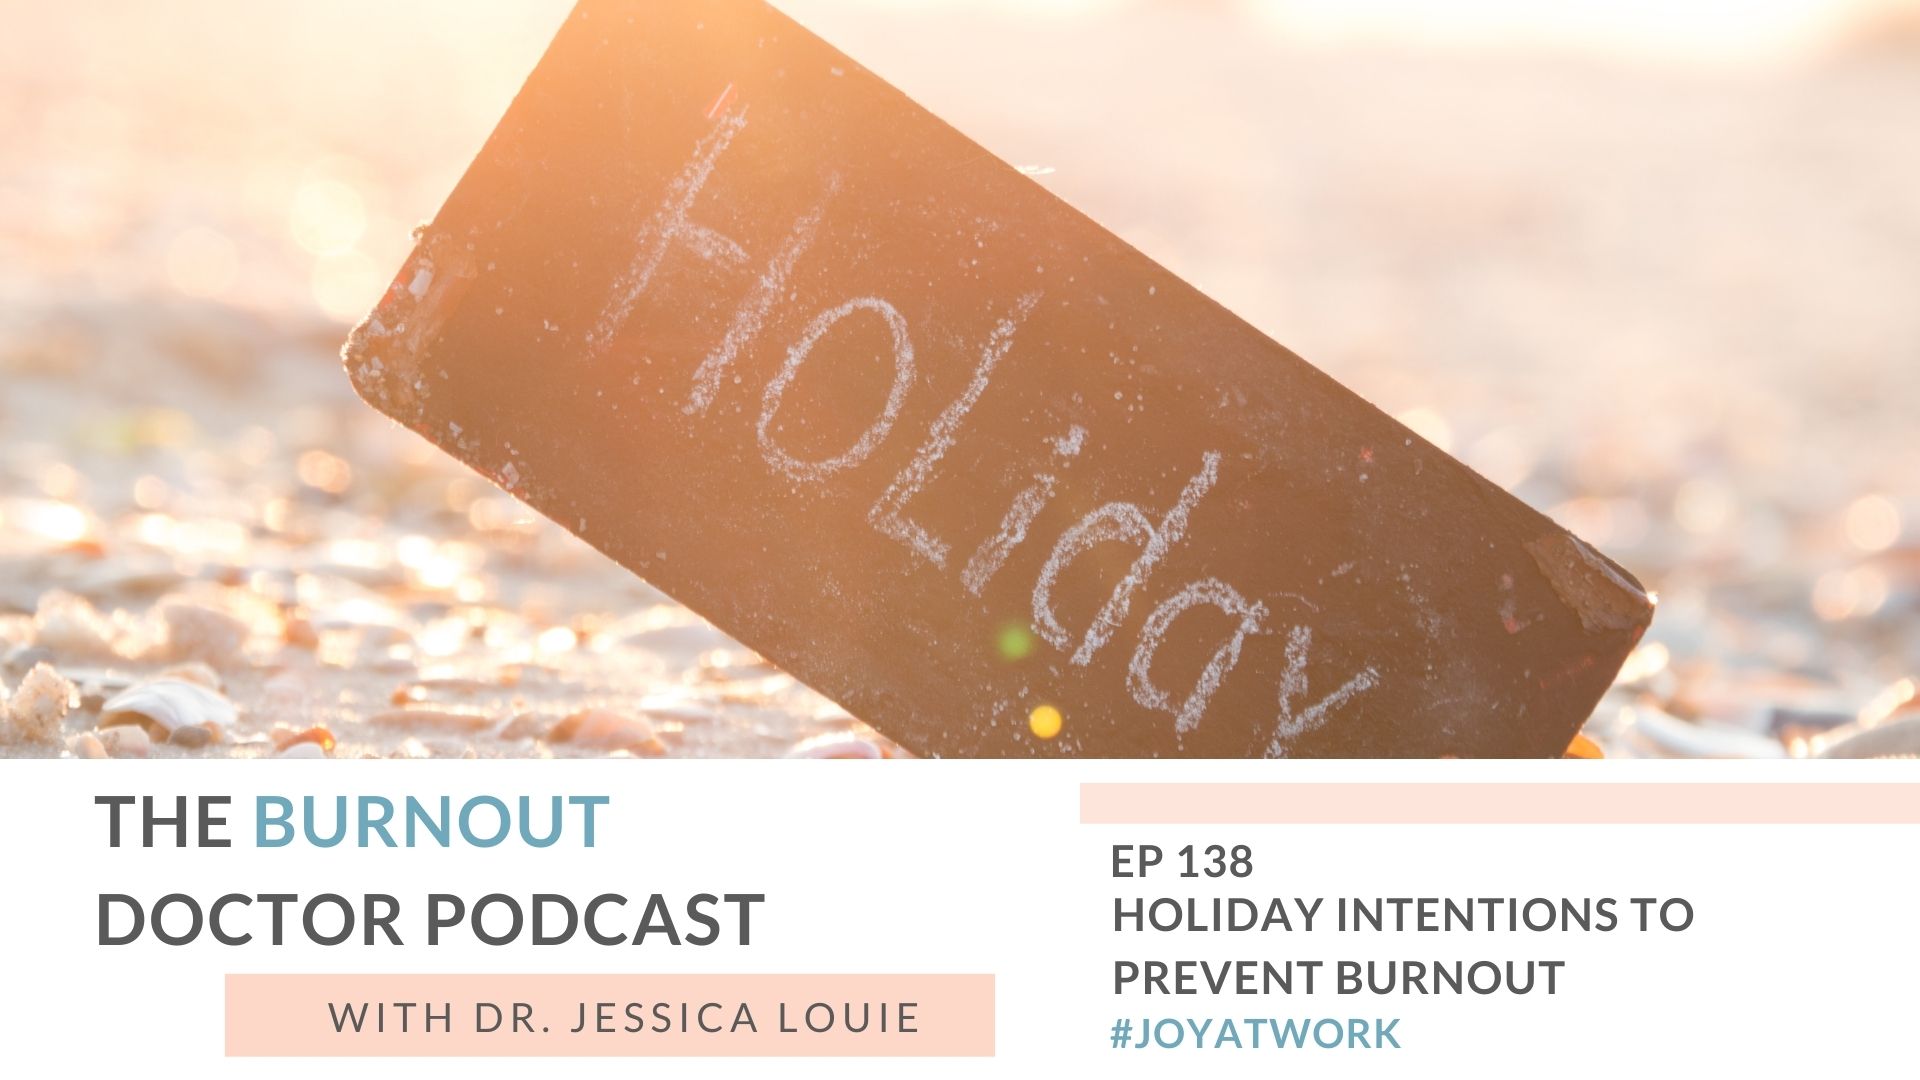 How to prevent holiday burnout. Holiday intentions to prevent burnout. The Burnout Doctor Podcast. Keynote speaker on burnout, well-being, konmari, clutter, simplifying.